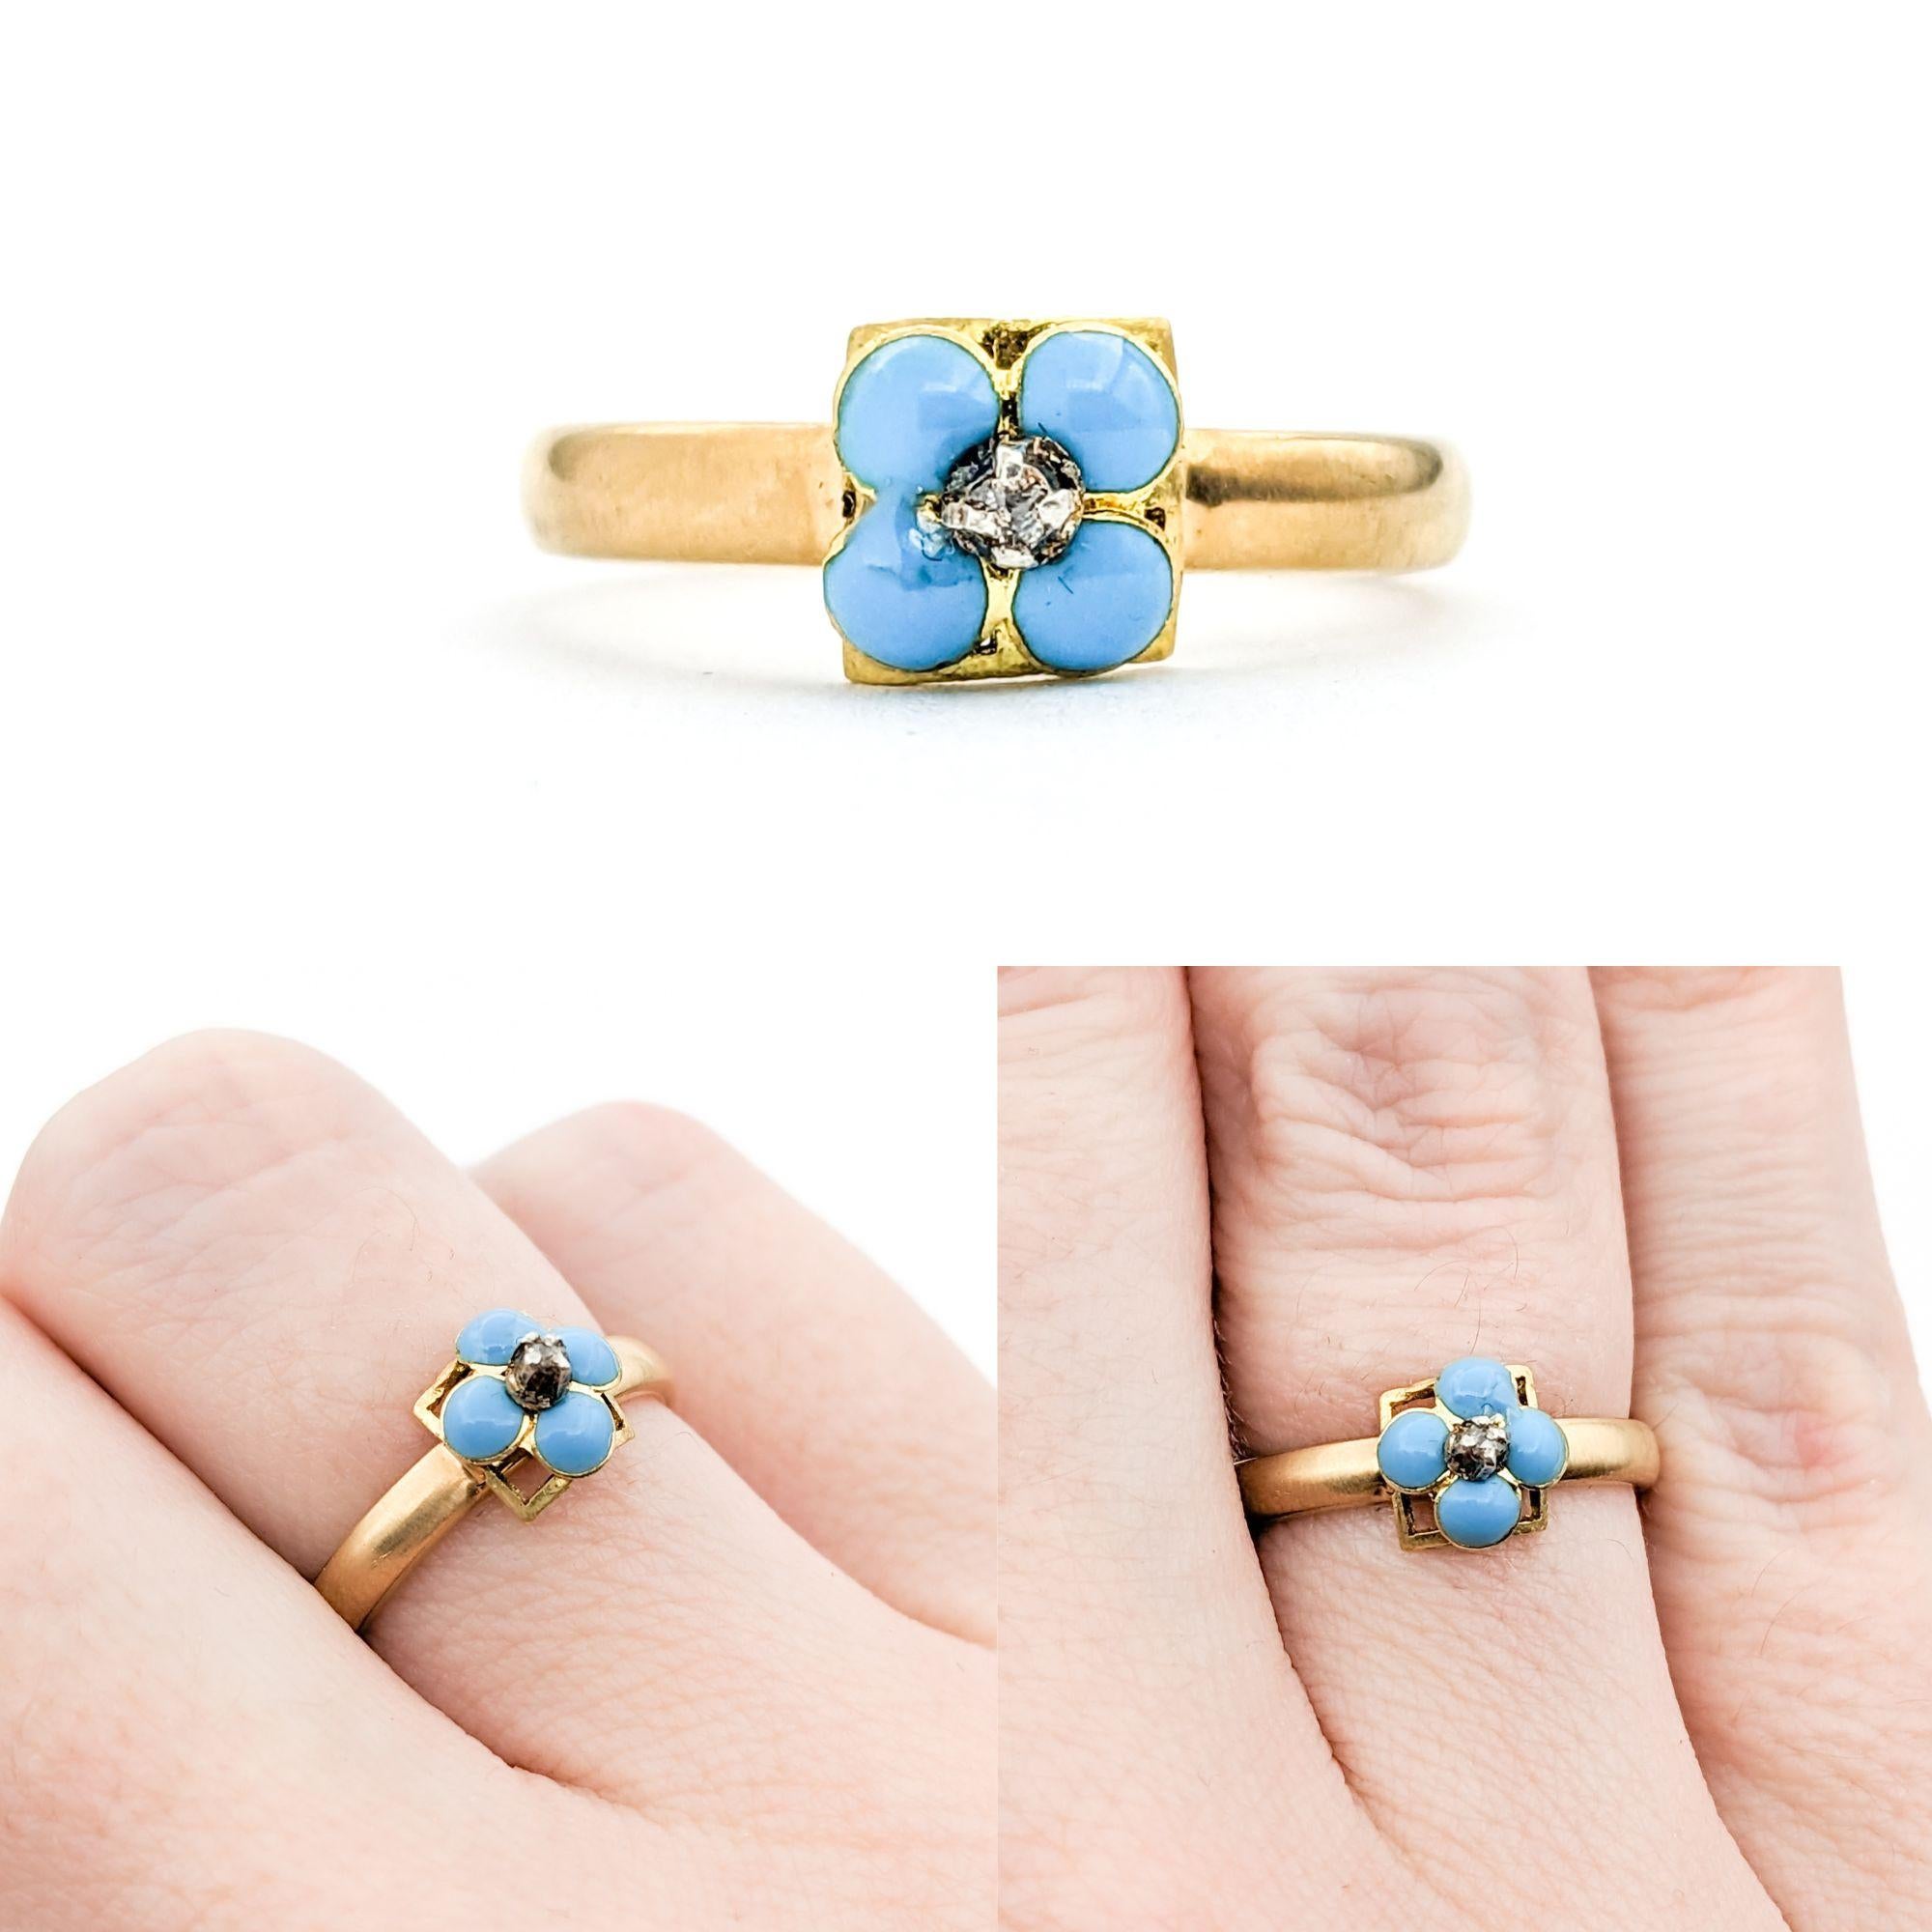 Antique Forget Me Not Enamel & Diamond Ring In Yellow Gold

Introducing this beautiful antique sentimental ring, masterfully crafted in 18k yellow gold. The focal point of this special piece is a blue enameled Forget Me Not Flower, in a lovely